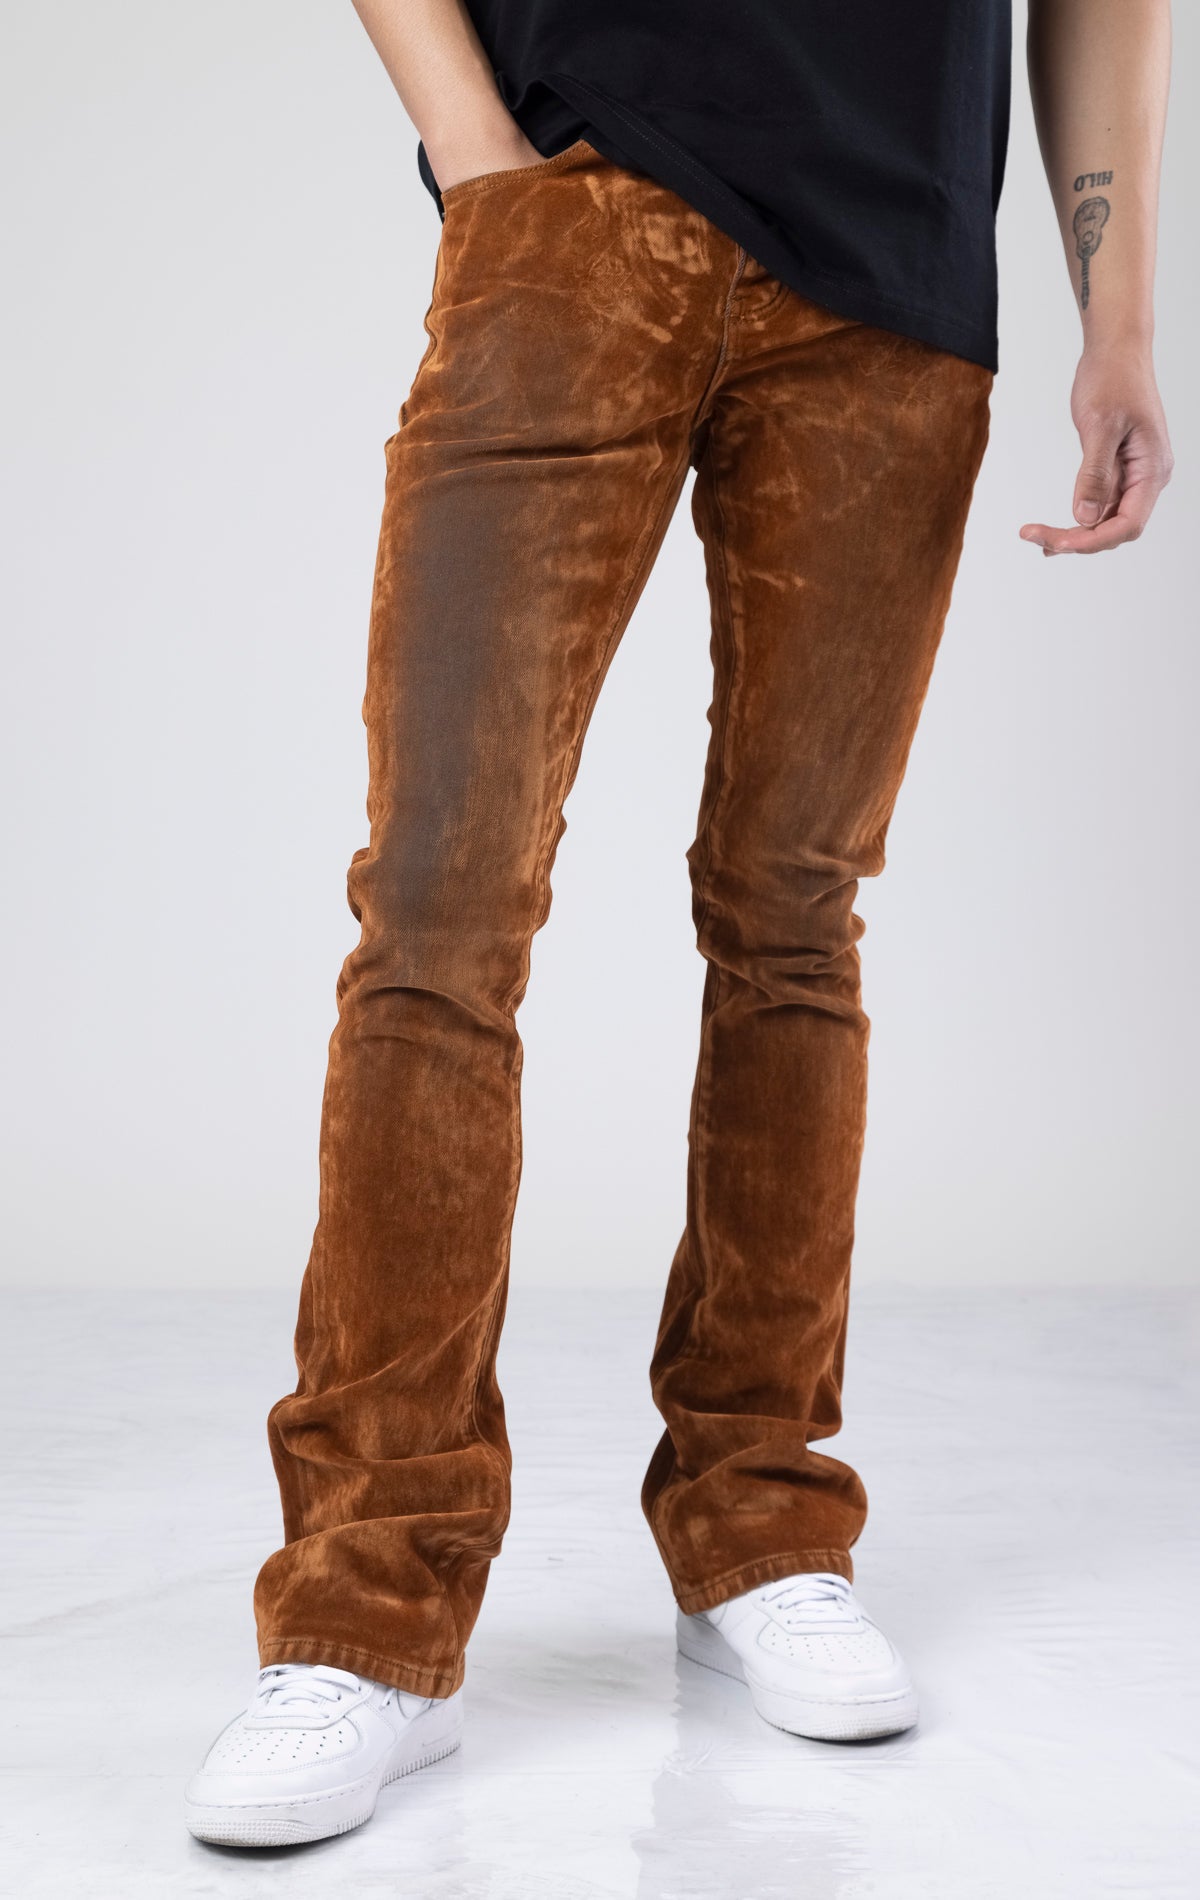 Brown suede stacked flare jeans with a comfortable cotton-spandex blend.